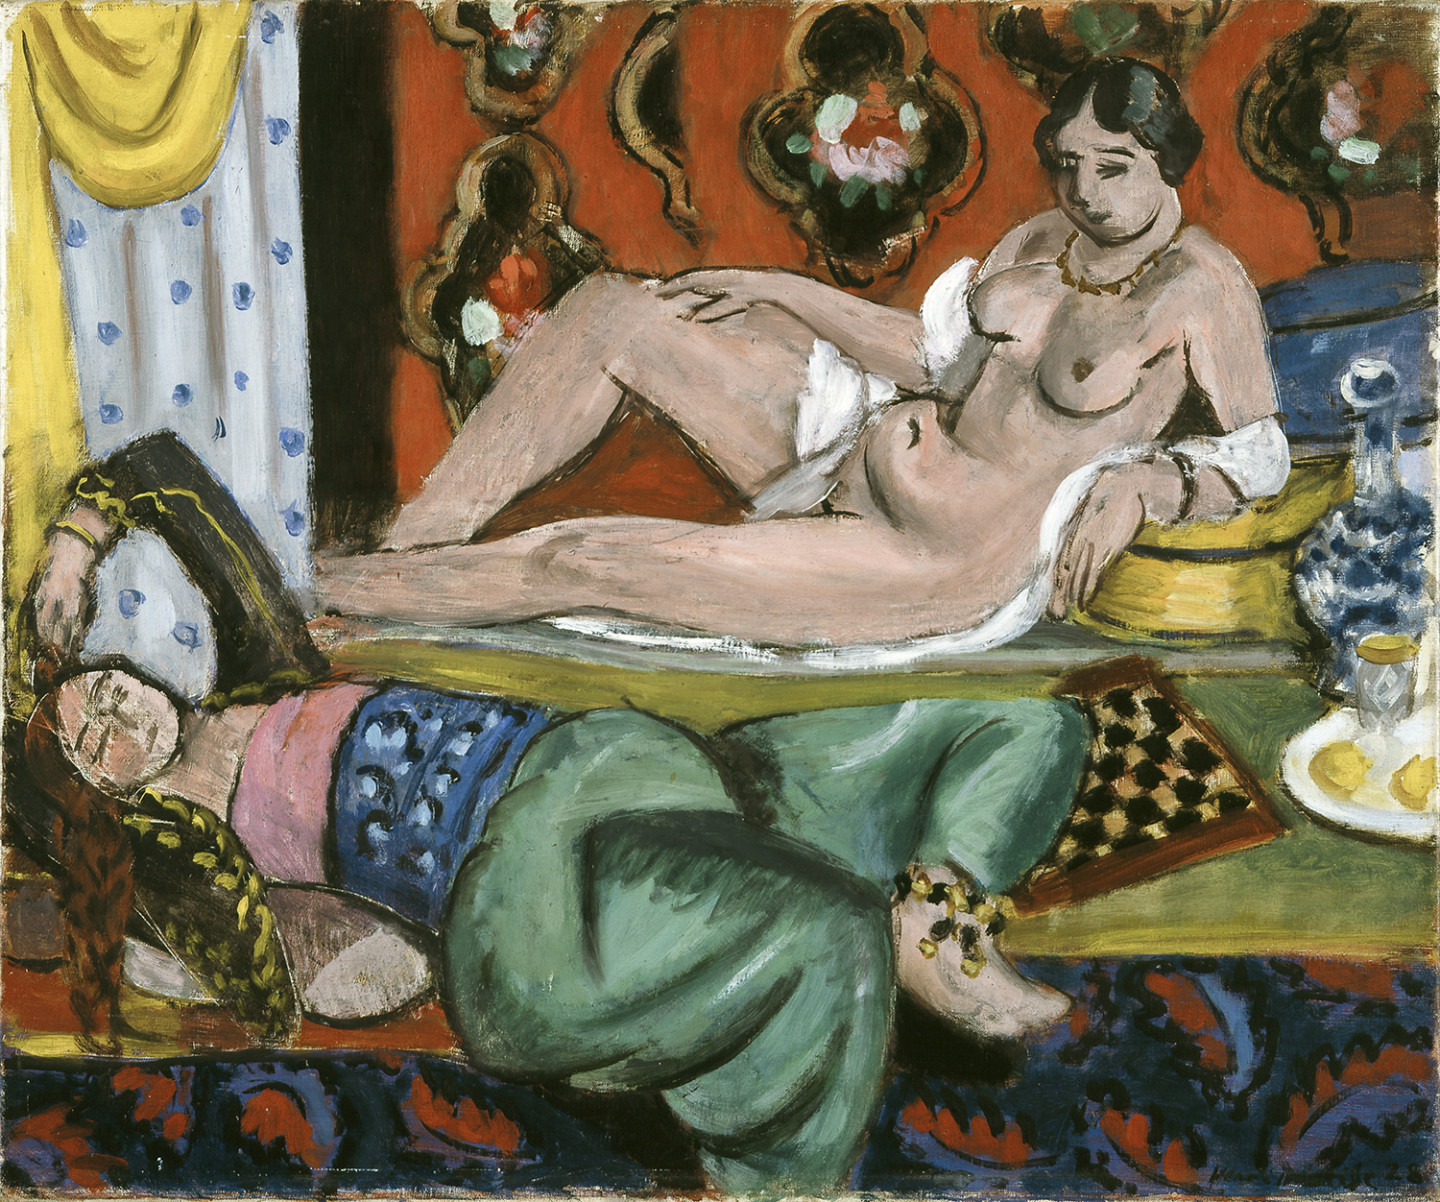 Two laying women in aroom